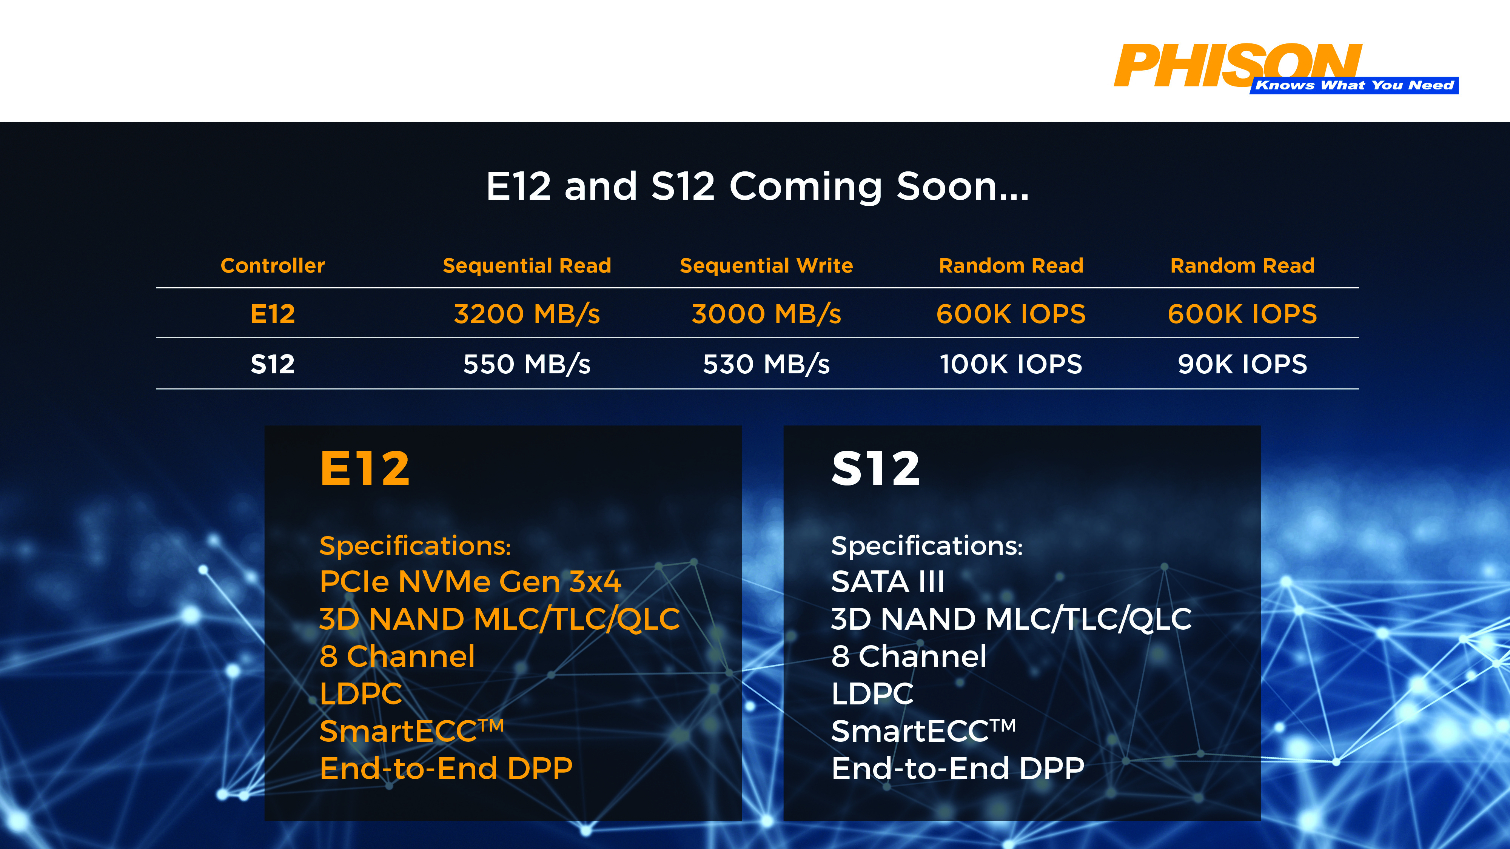 Phison details upcoming QLC compliant E12 and S12 memory controllers